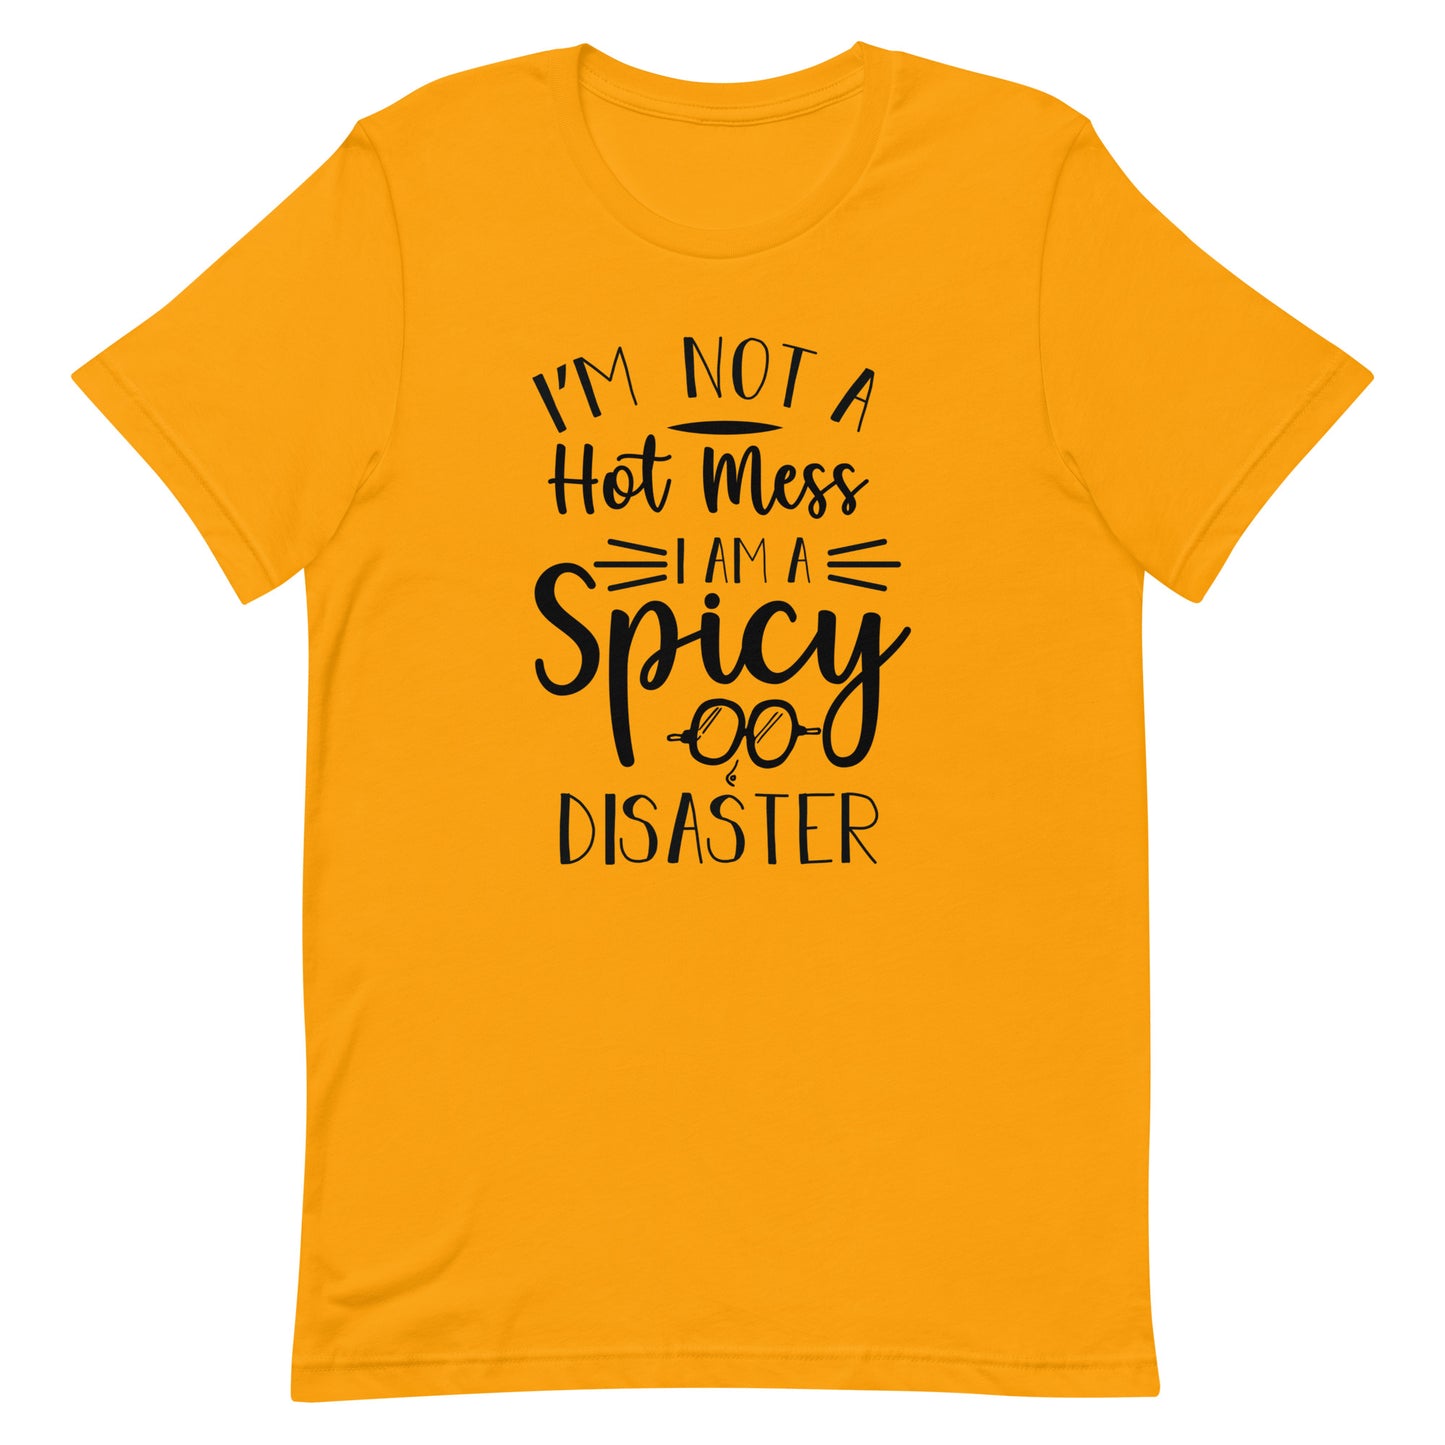 I'm Not a Hot Mess I Am a Spicy Disaster Unisex t-shirt